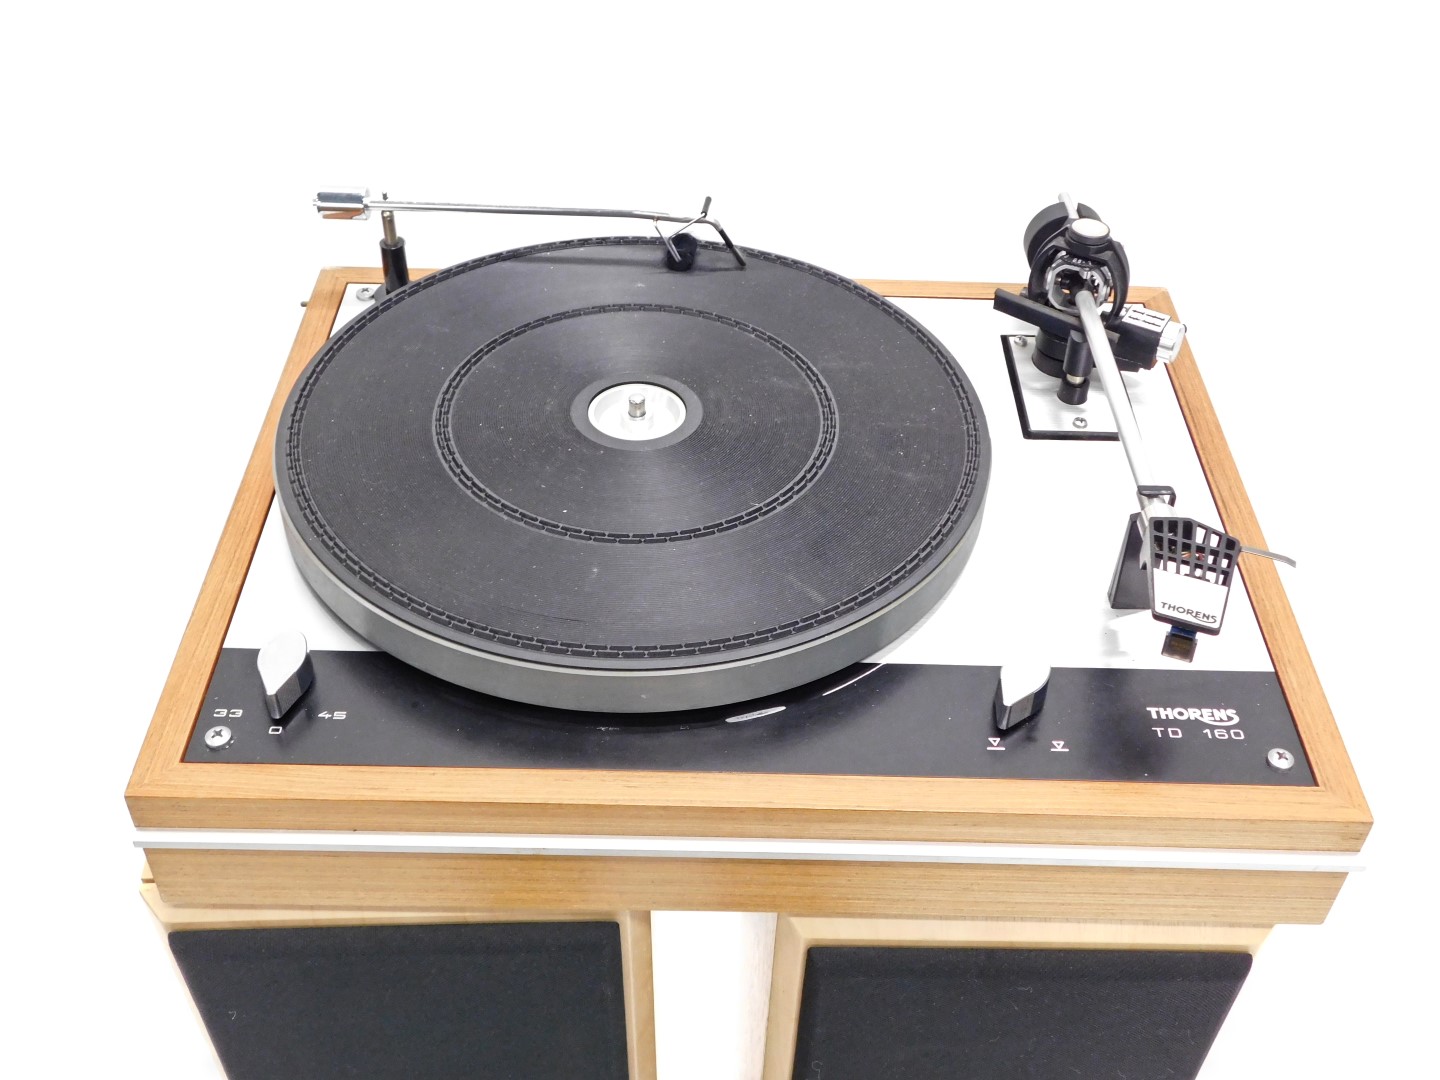 A Thorens TD160 turntable, and a pair of AE speakers. - Image 2 of 6